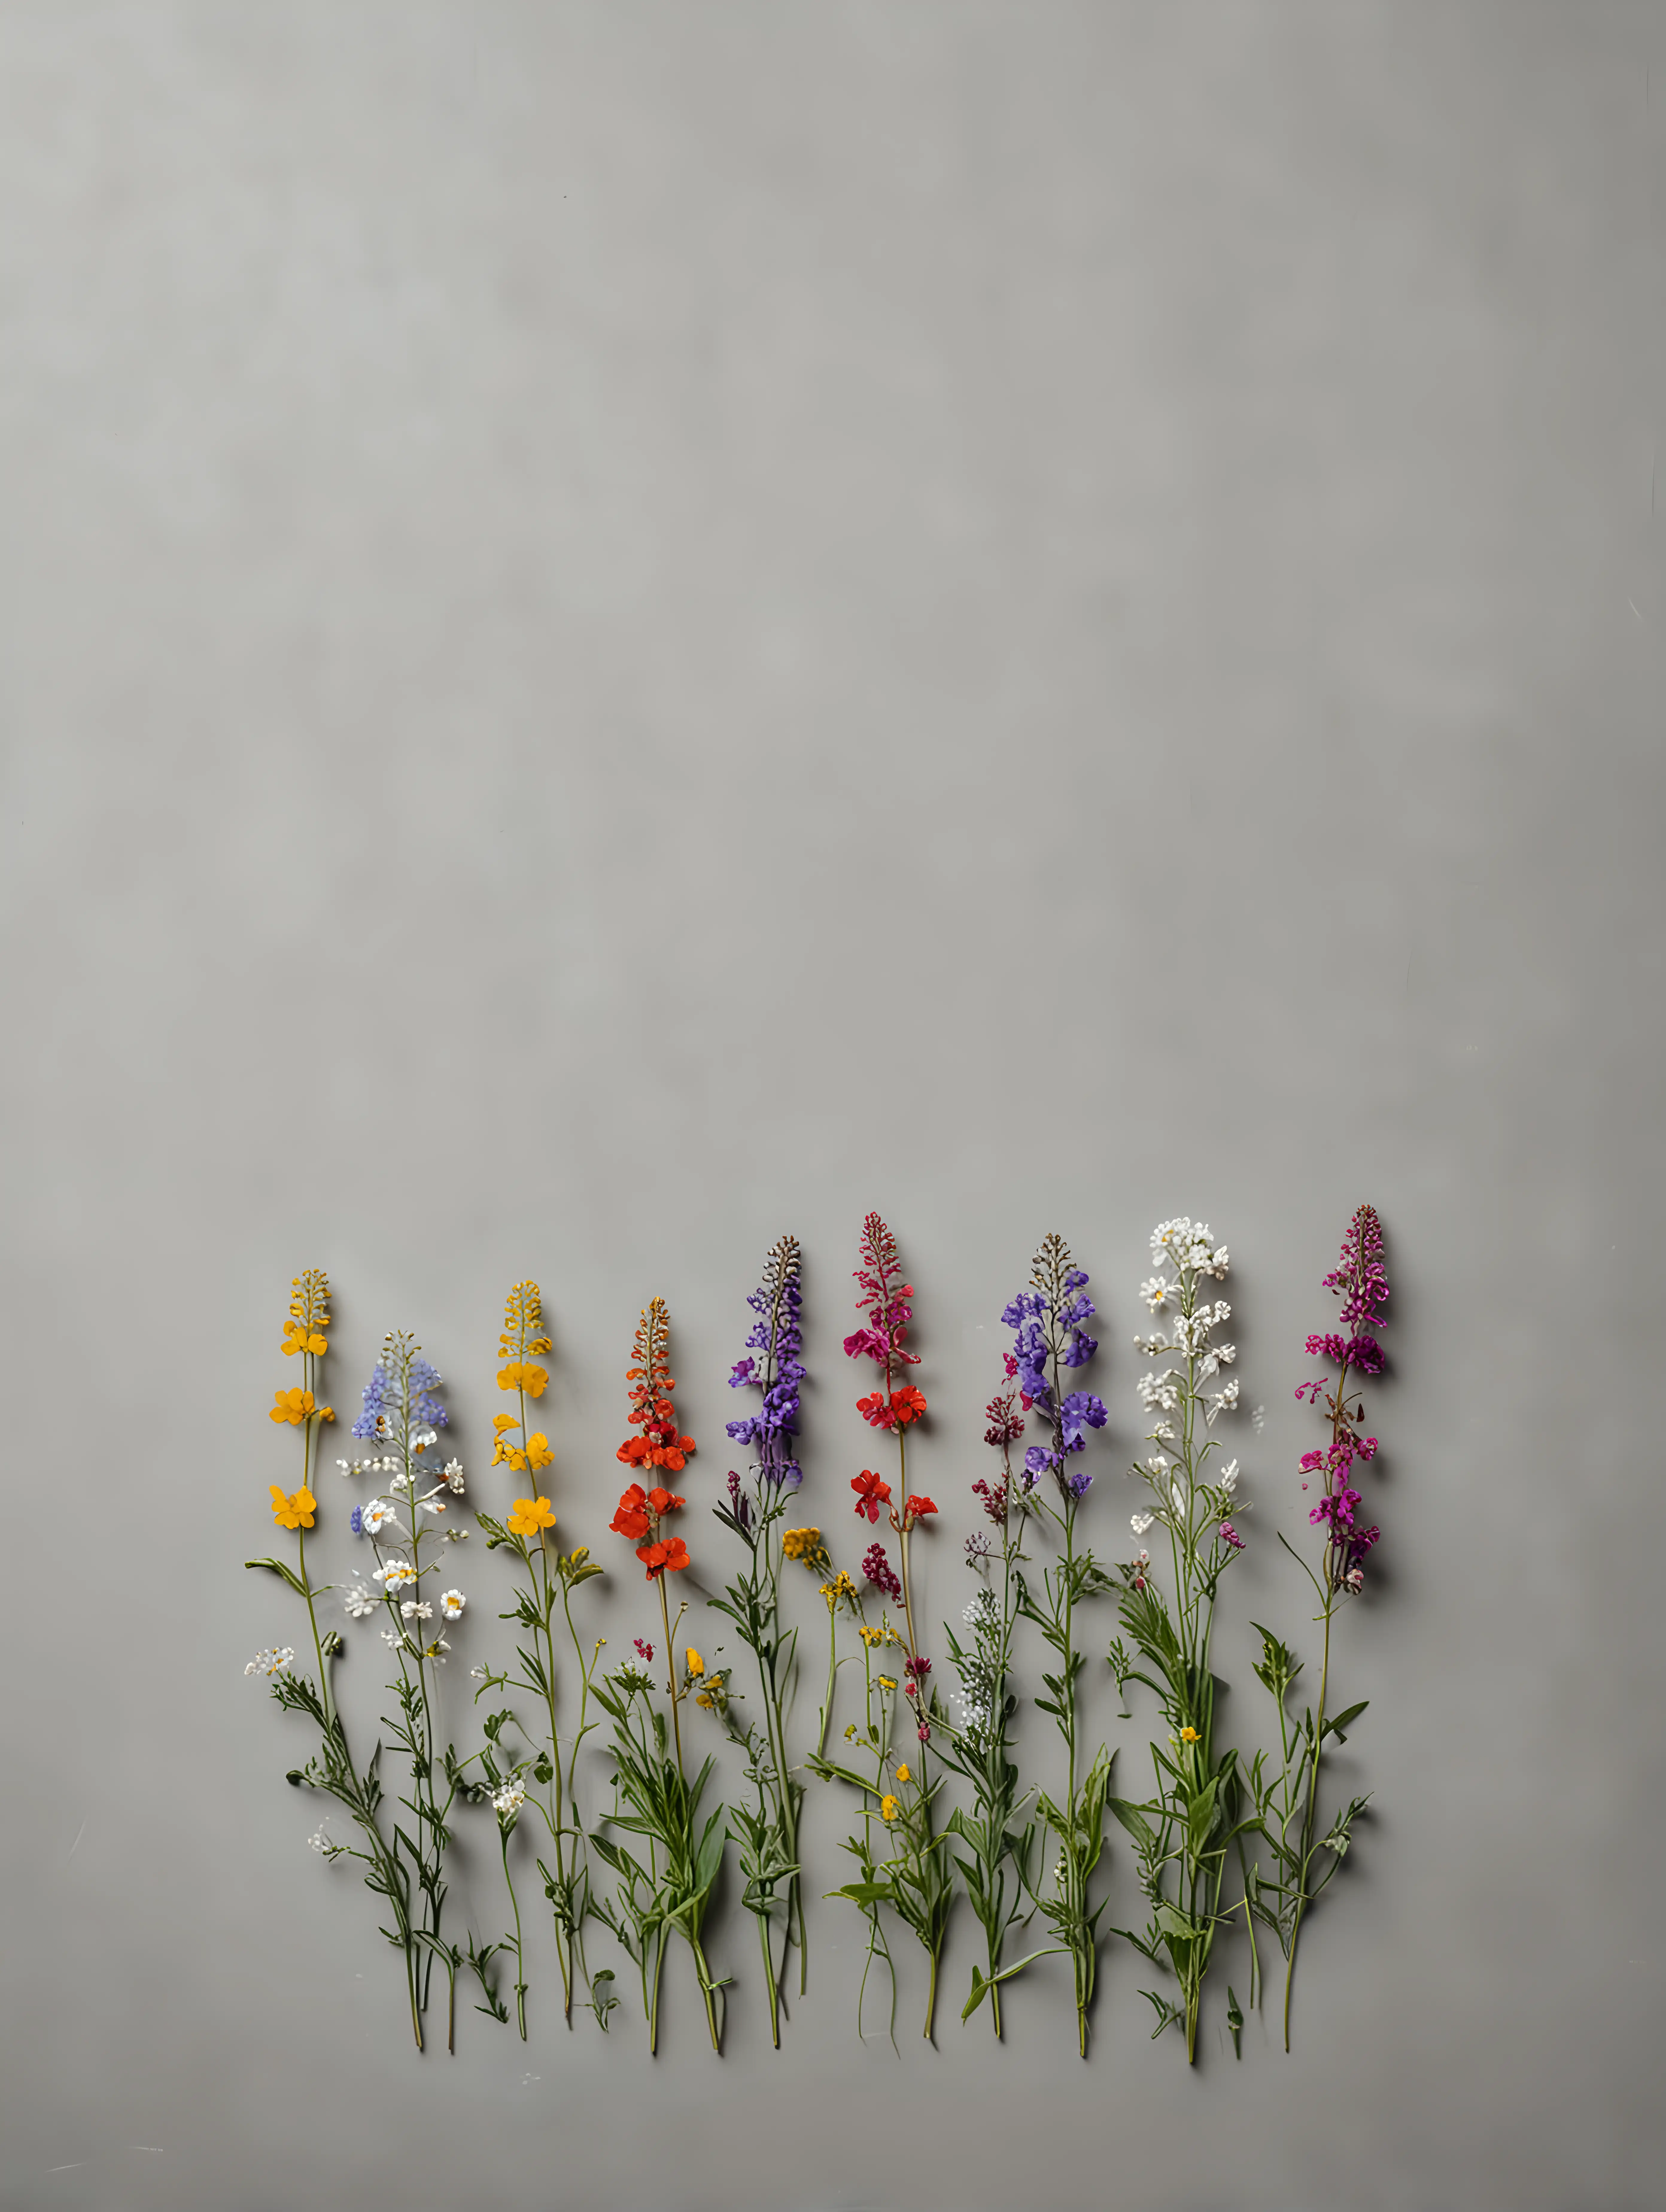 a single row of wildflowers grows in front of a neutral gray background.